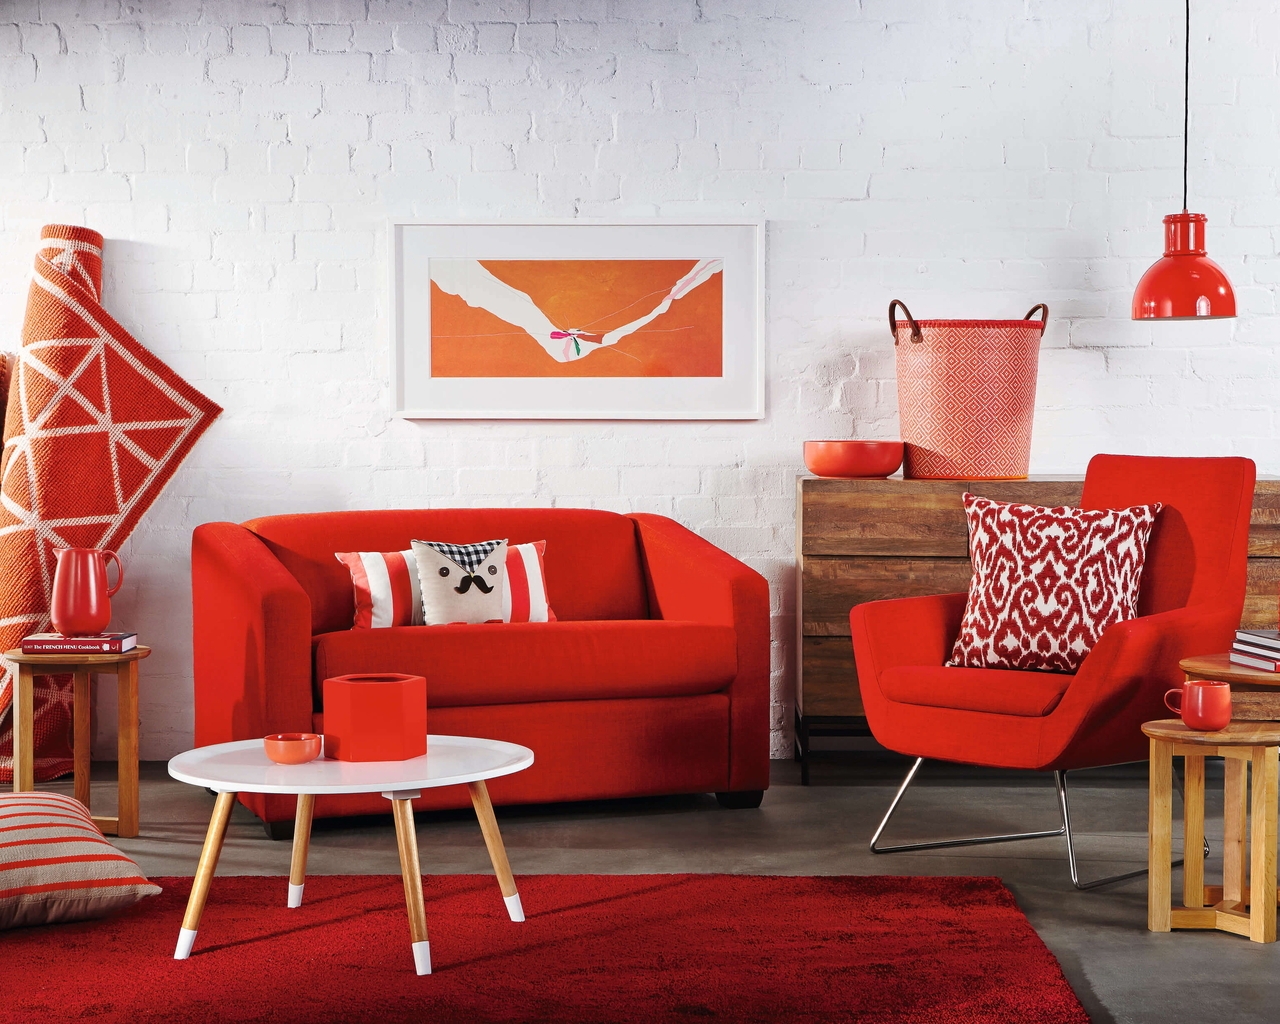 Image: Decor, room, red, color, interior, sofa, chair, pillow, picture, carpet, wall, brick